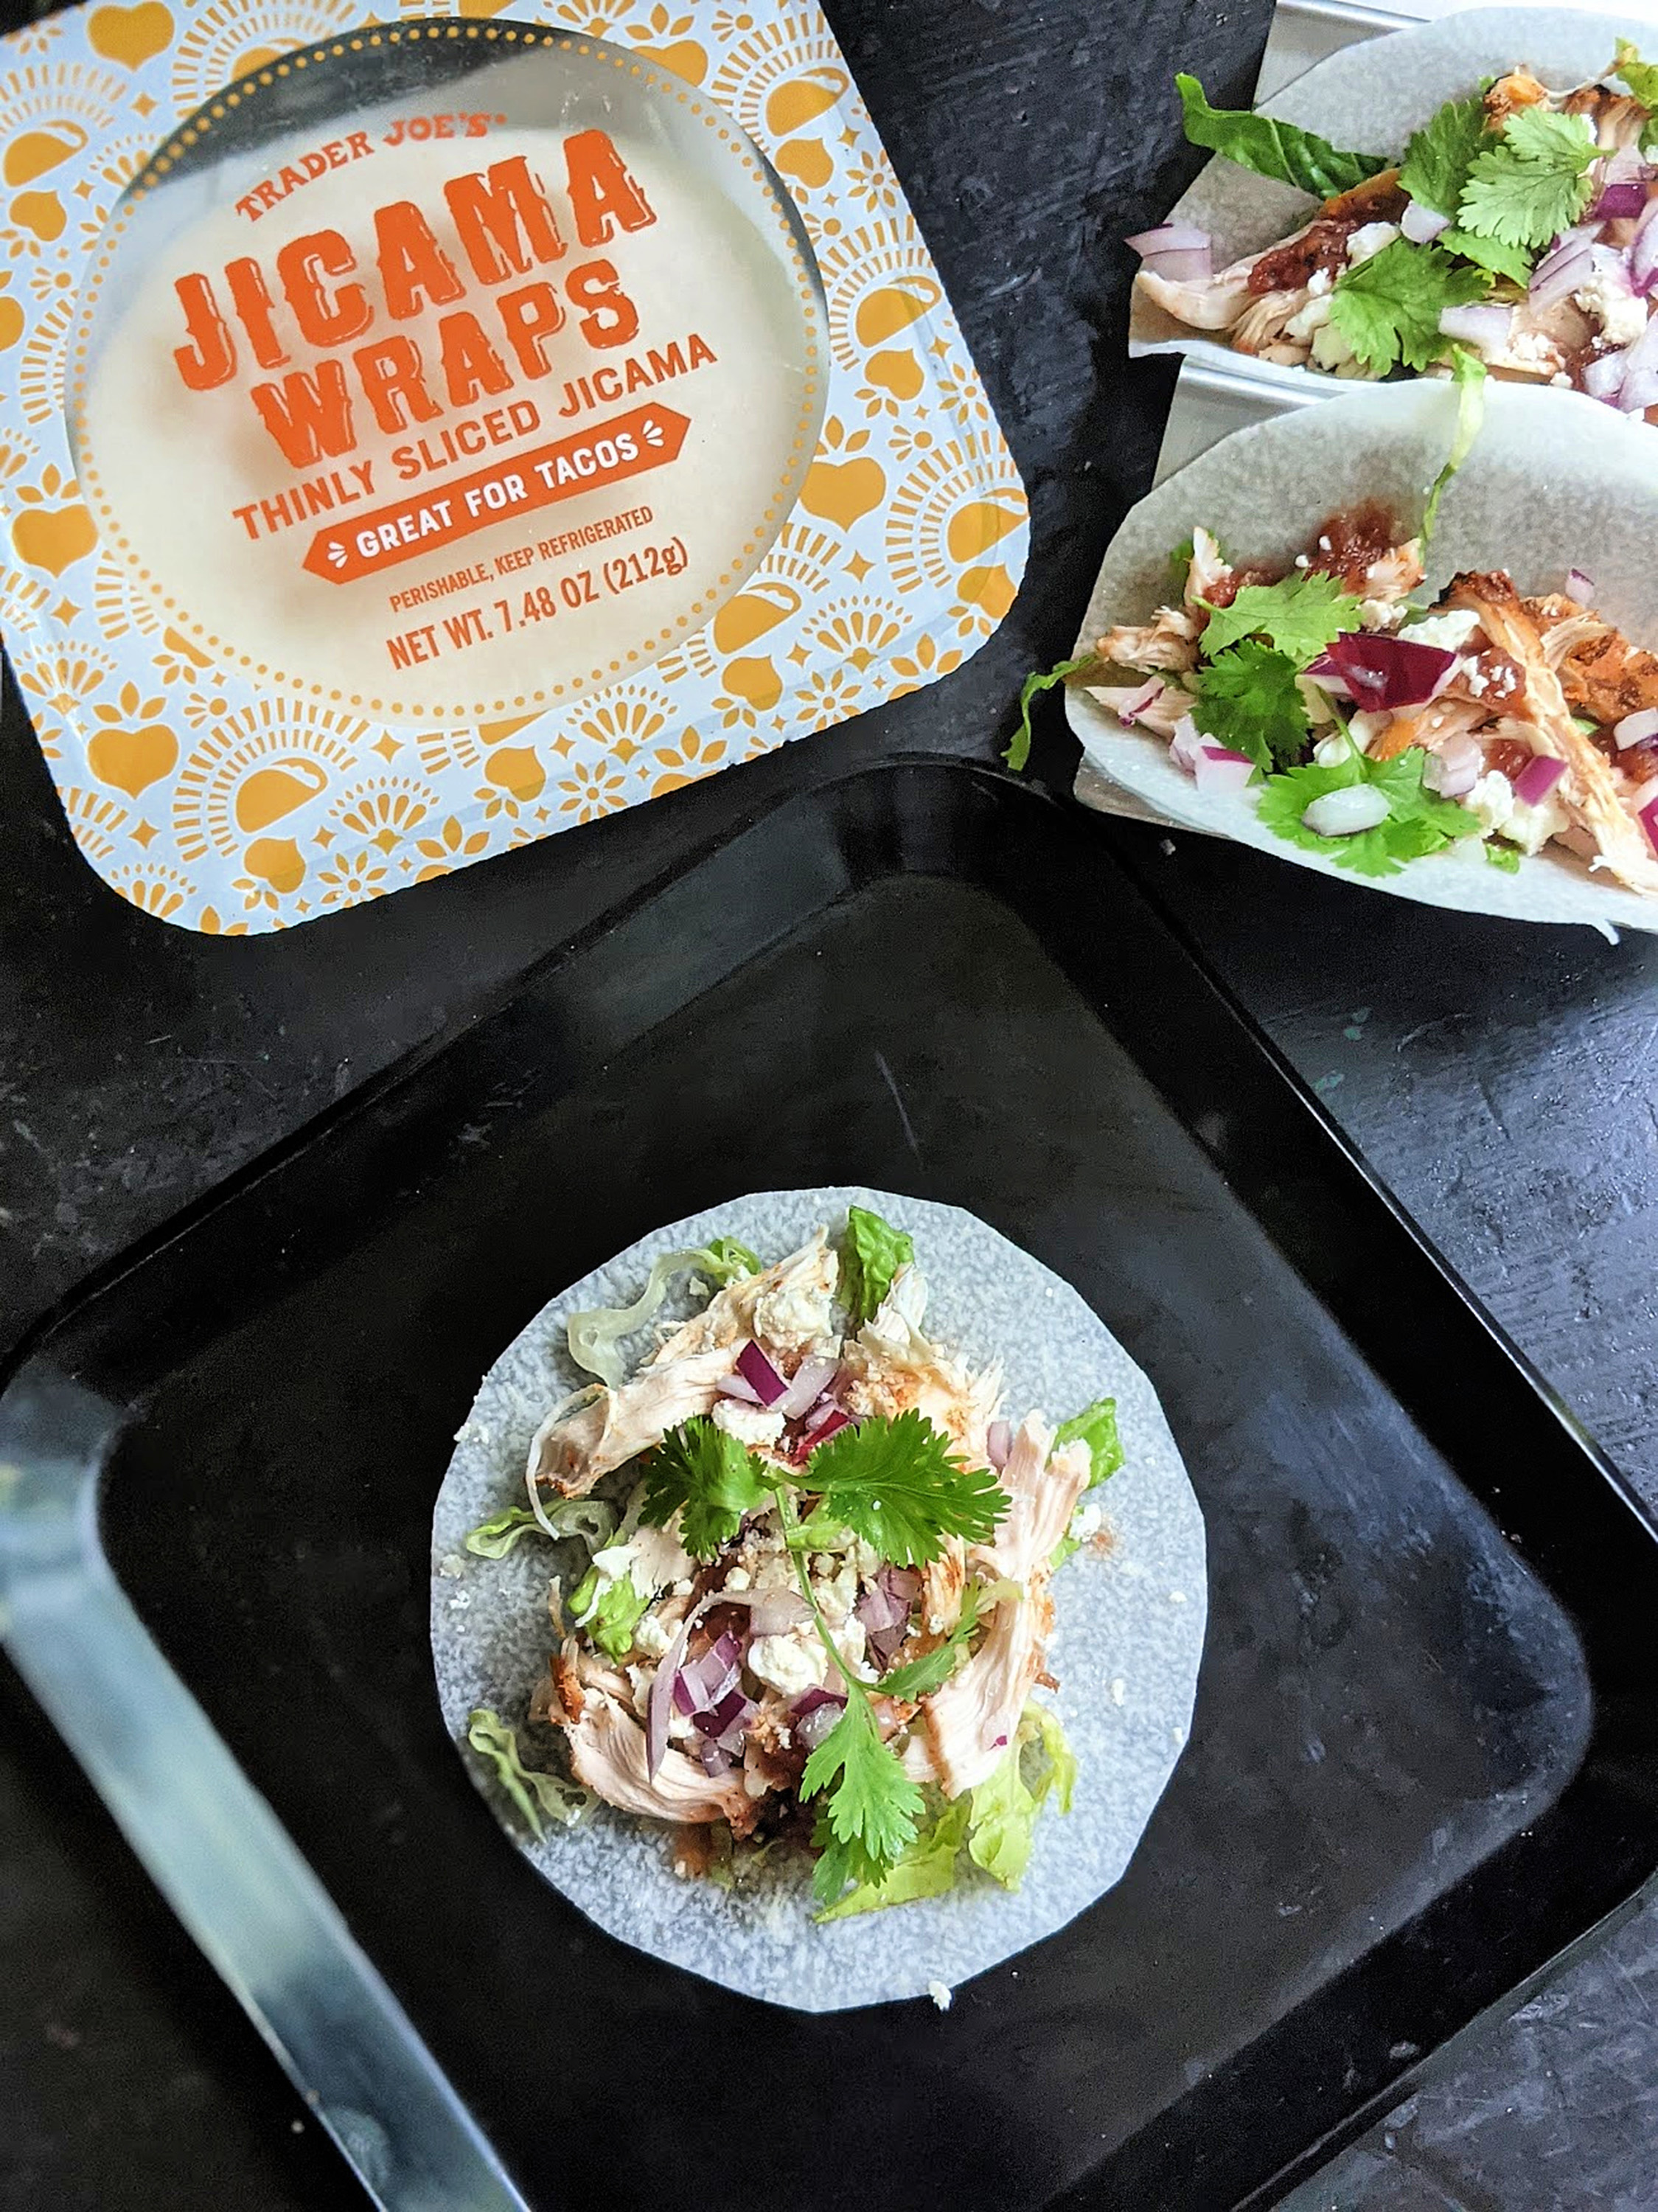 trader-joe-s-jicama-wraps-can-stand-in-for-taco-shells-chattanooga